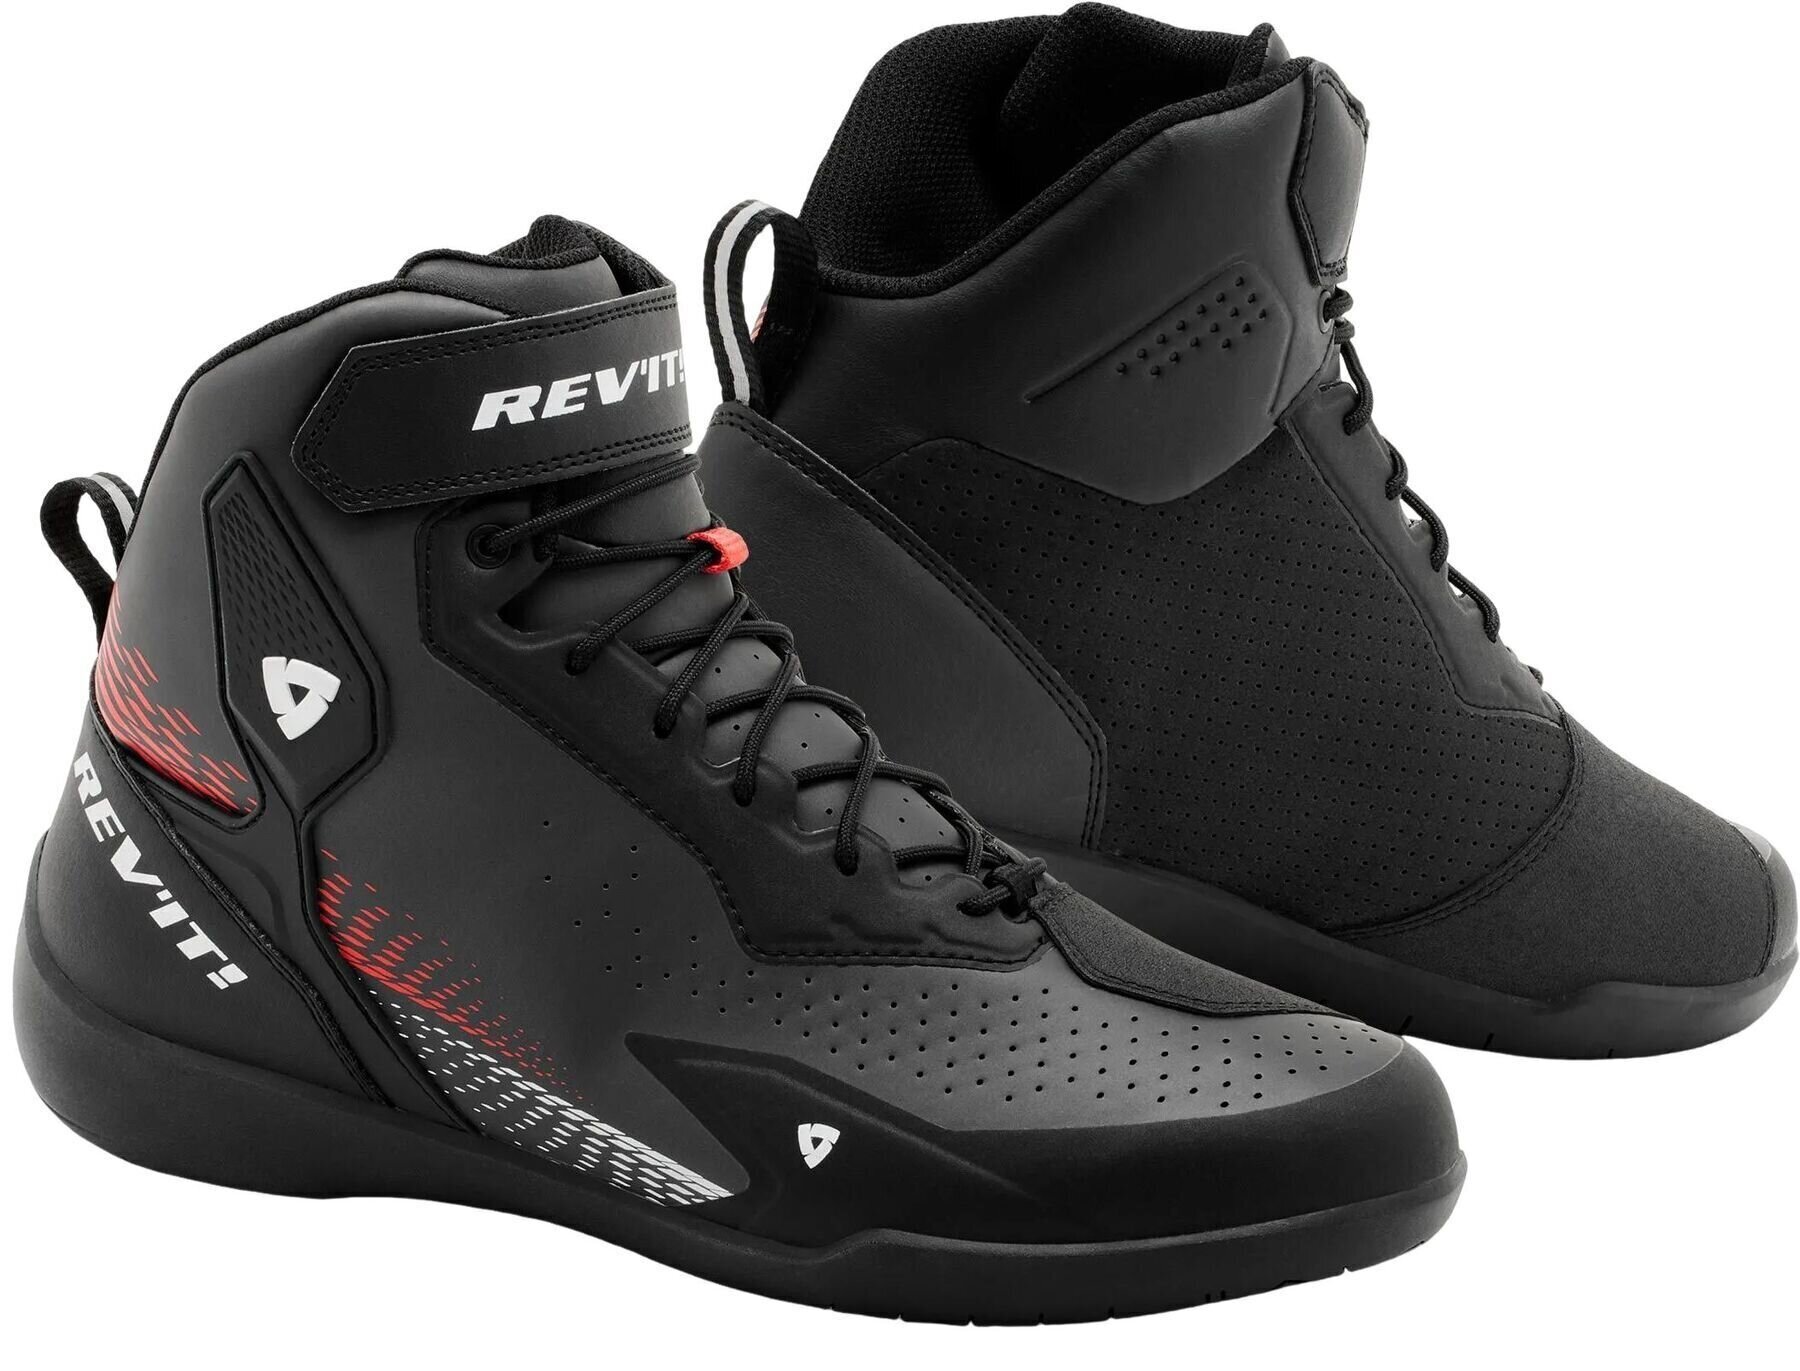 Photos - Motorcycle Clothing Rev'it! Rev'it! Shoes G-Force 2 Black/Neon Red 46 Motorcycle Boots FBR104